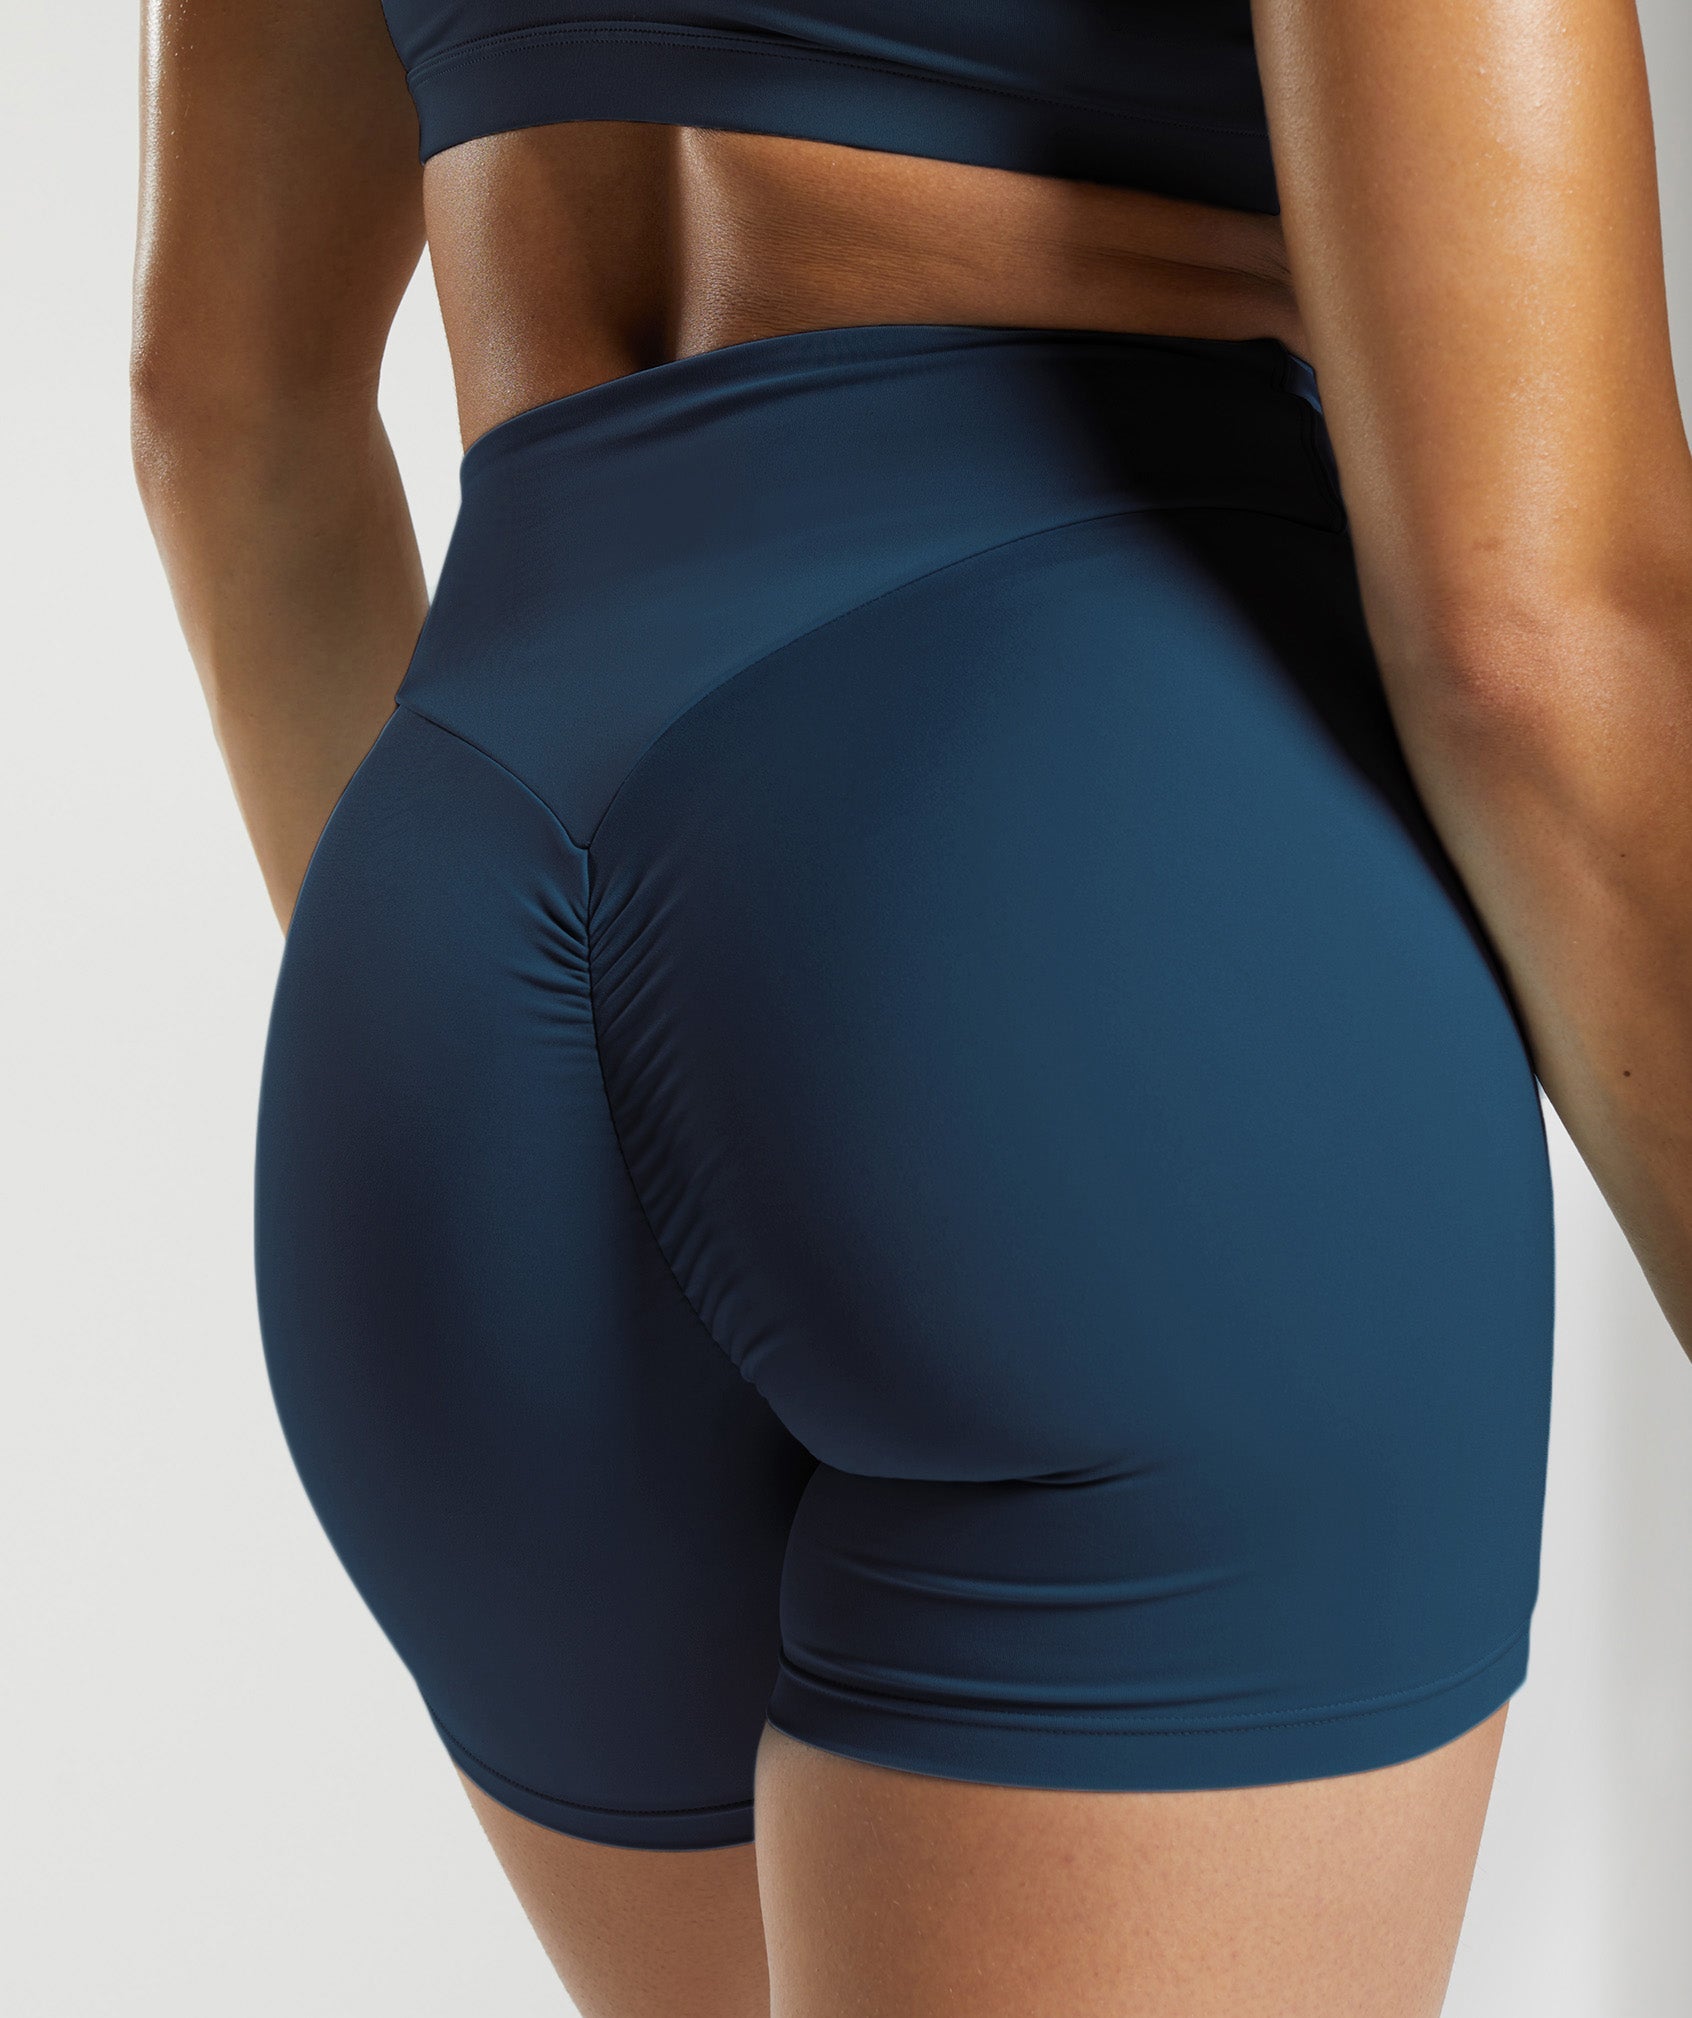 GS Power Original Tight Shorts in Navy - view 5